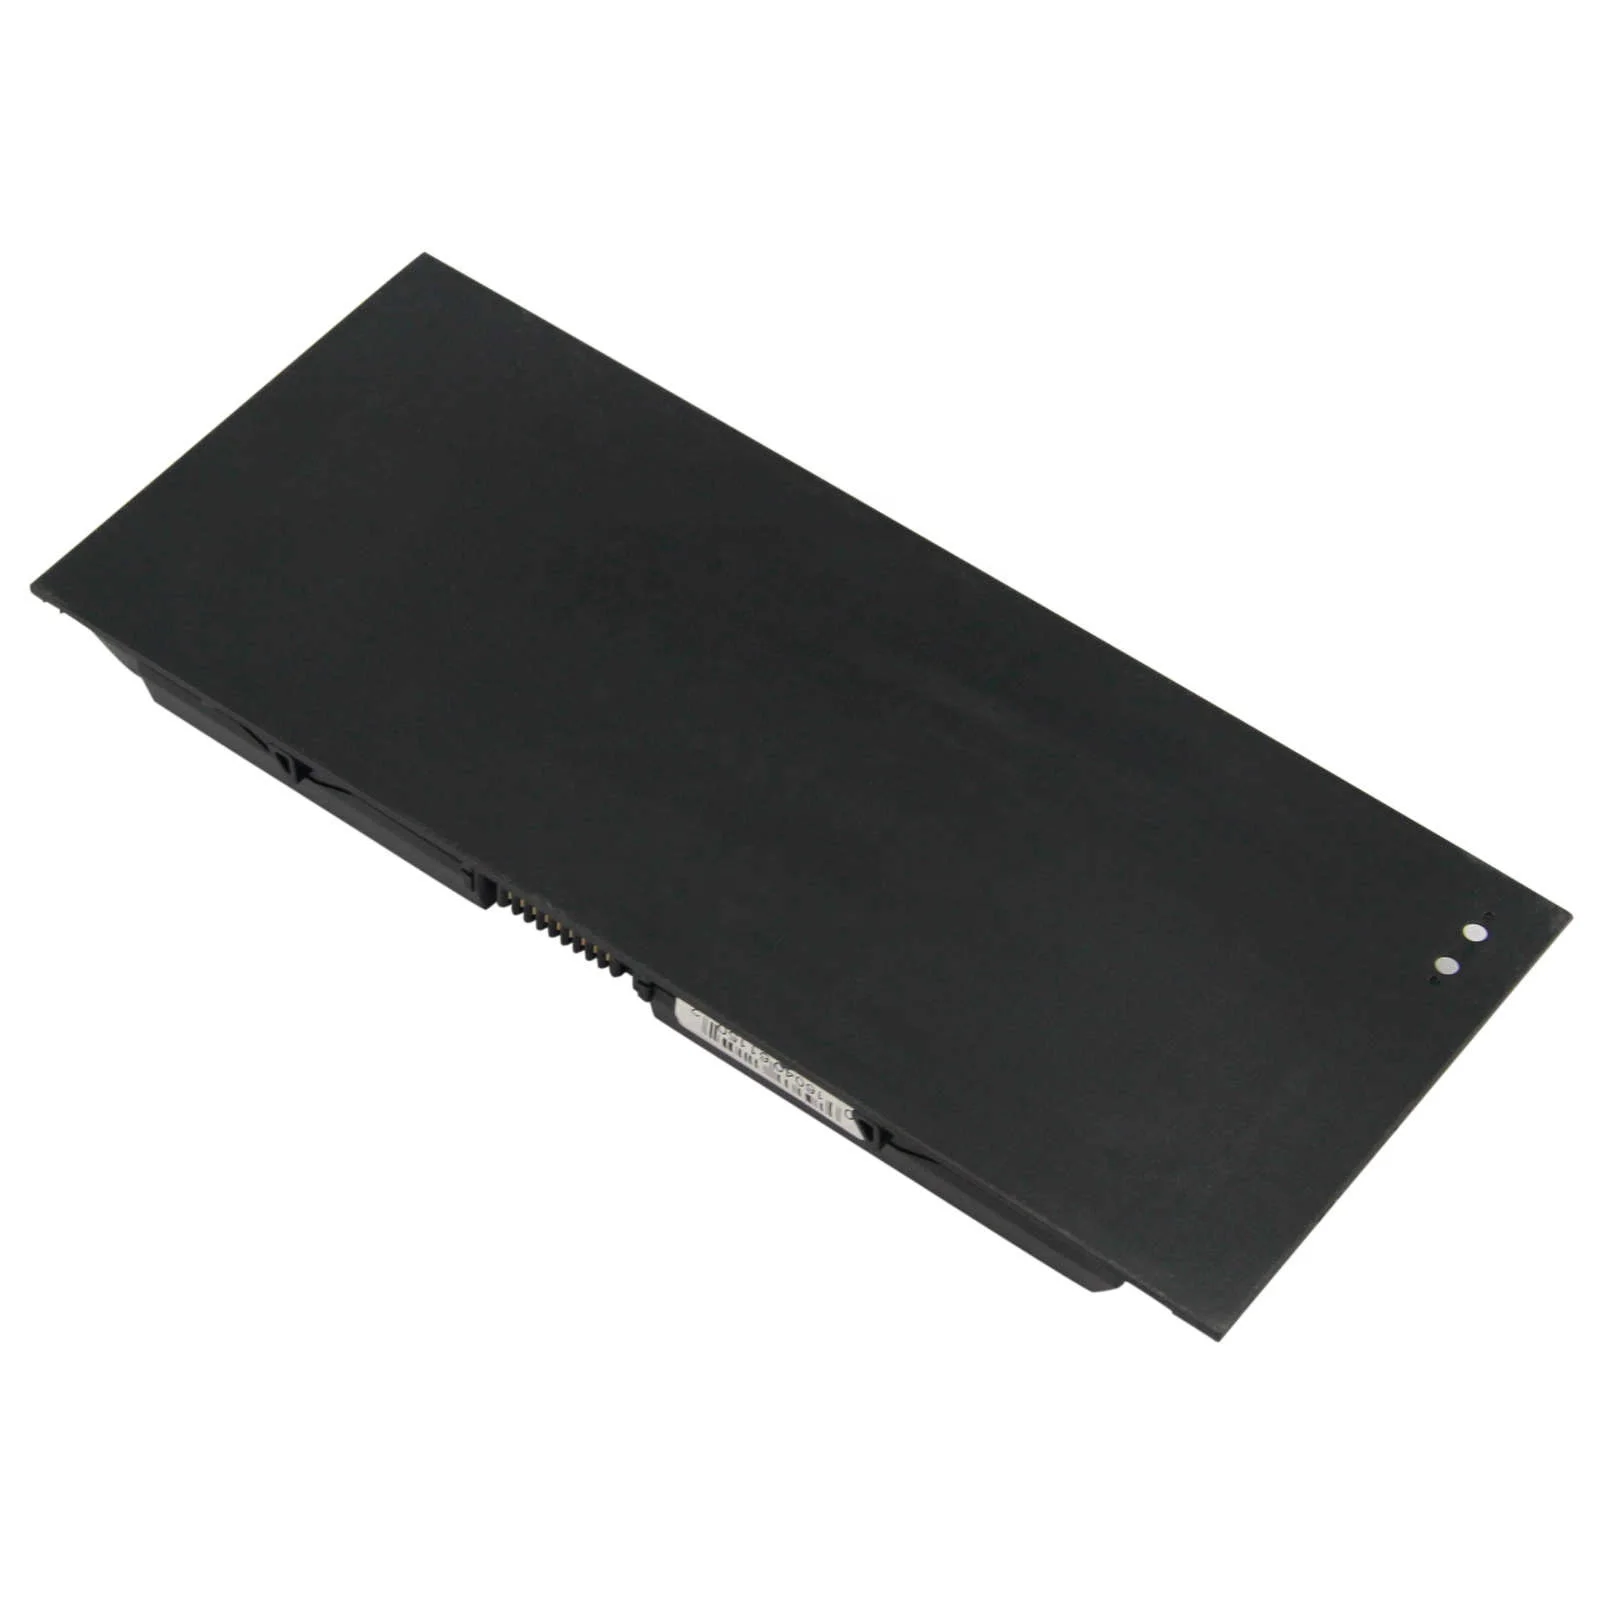 9 cell rechargeable laptop battery for Dell Precision M6600 M4700 Compatible battery model 0TN1K5 312-1176 312-1177 312-1178